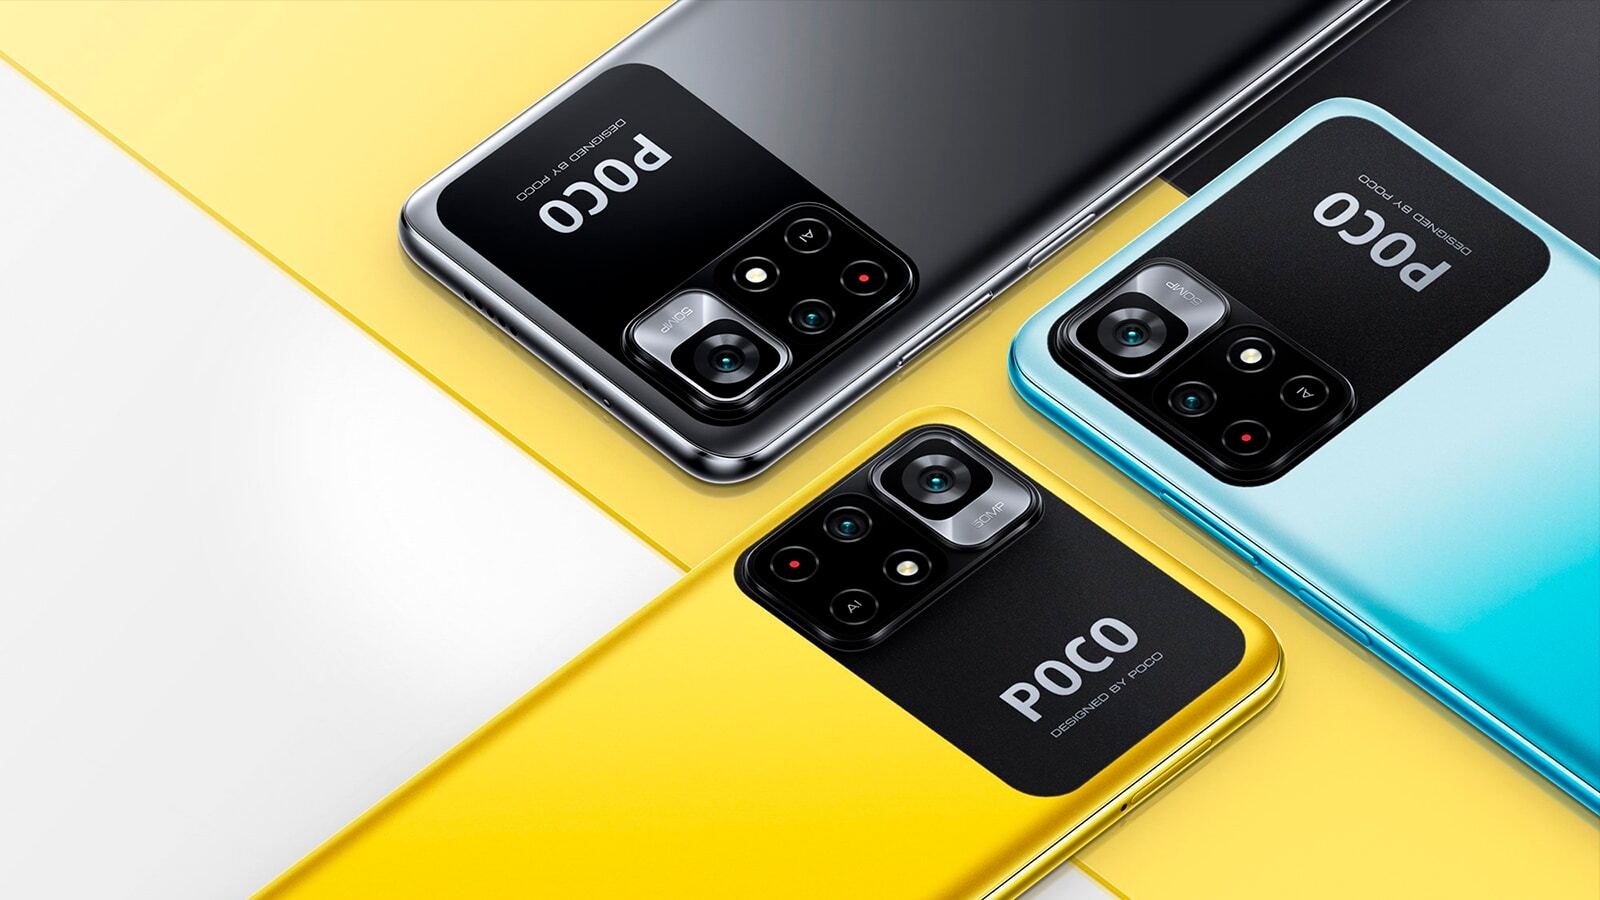 The POCO M4 Pro 5G is priced at AliExpress Lightning on R $ 1,032.83 and R $ 1,101.68, depending on the combo option, plus free shipping.